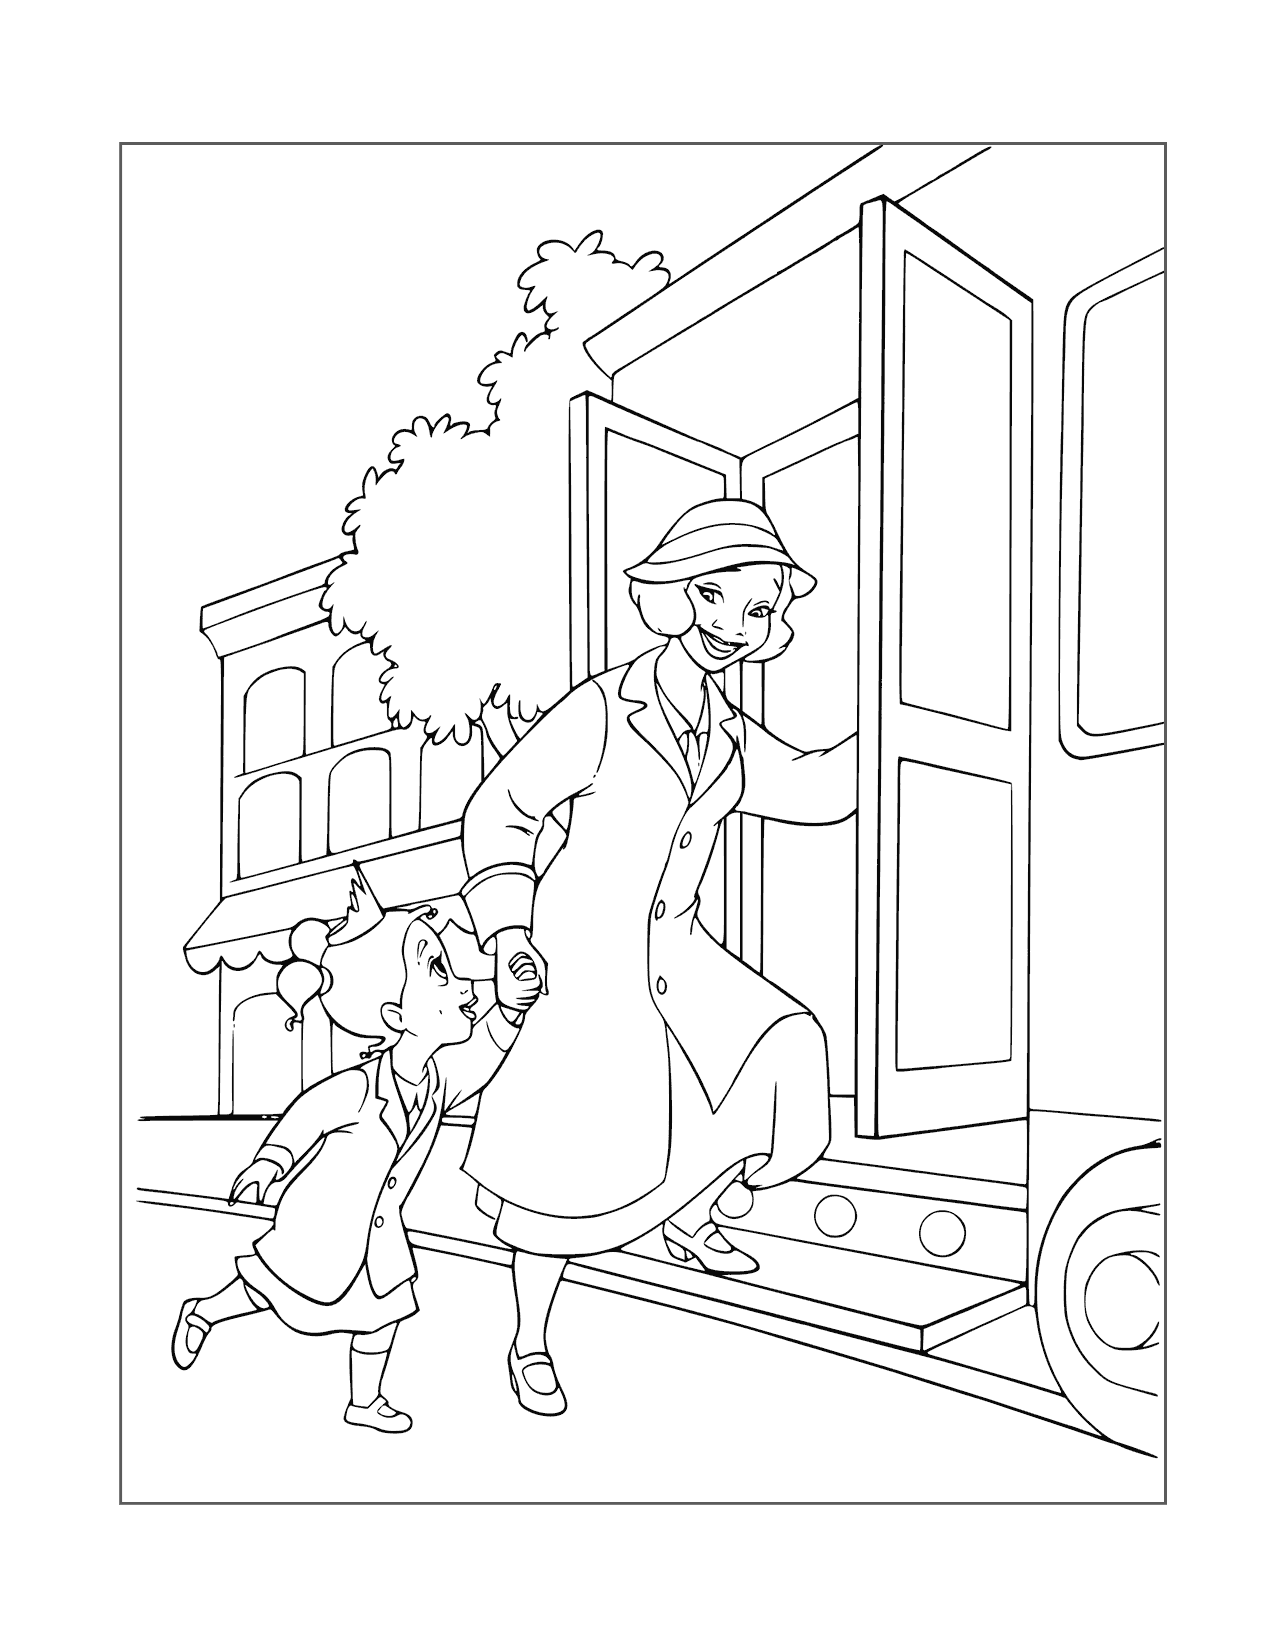 Eudora Brings Young Tiana On The Train Coloring Page